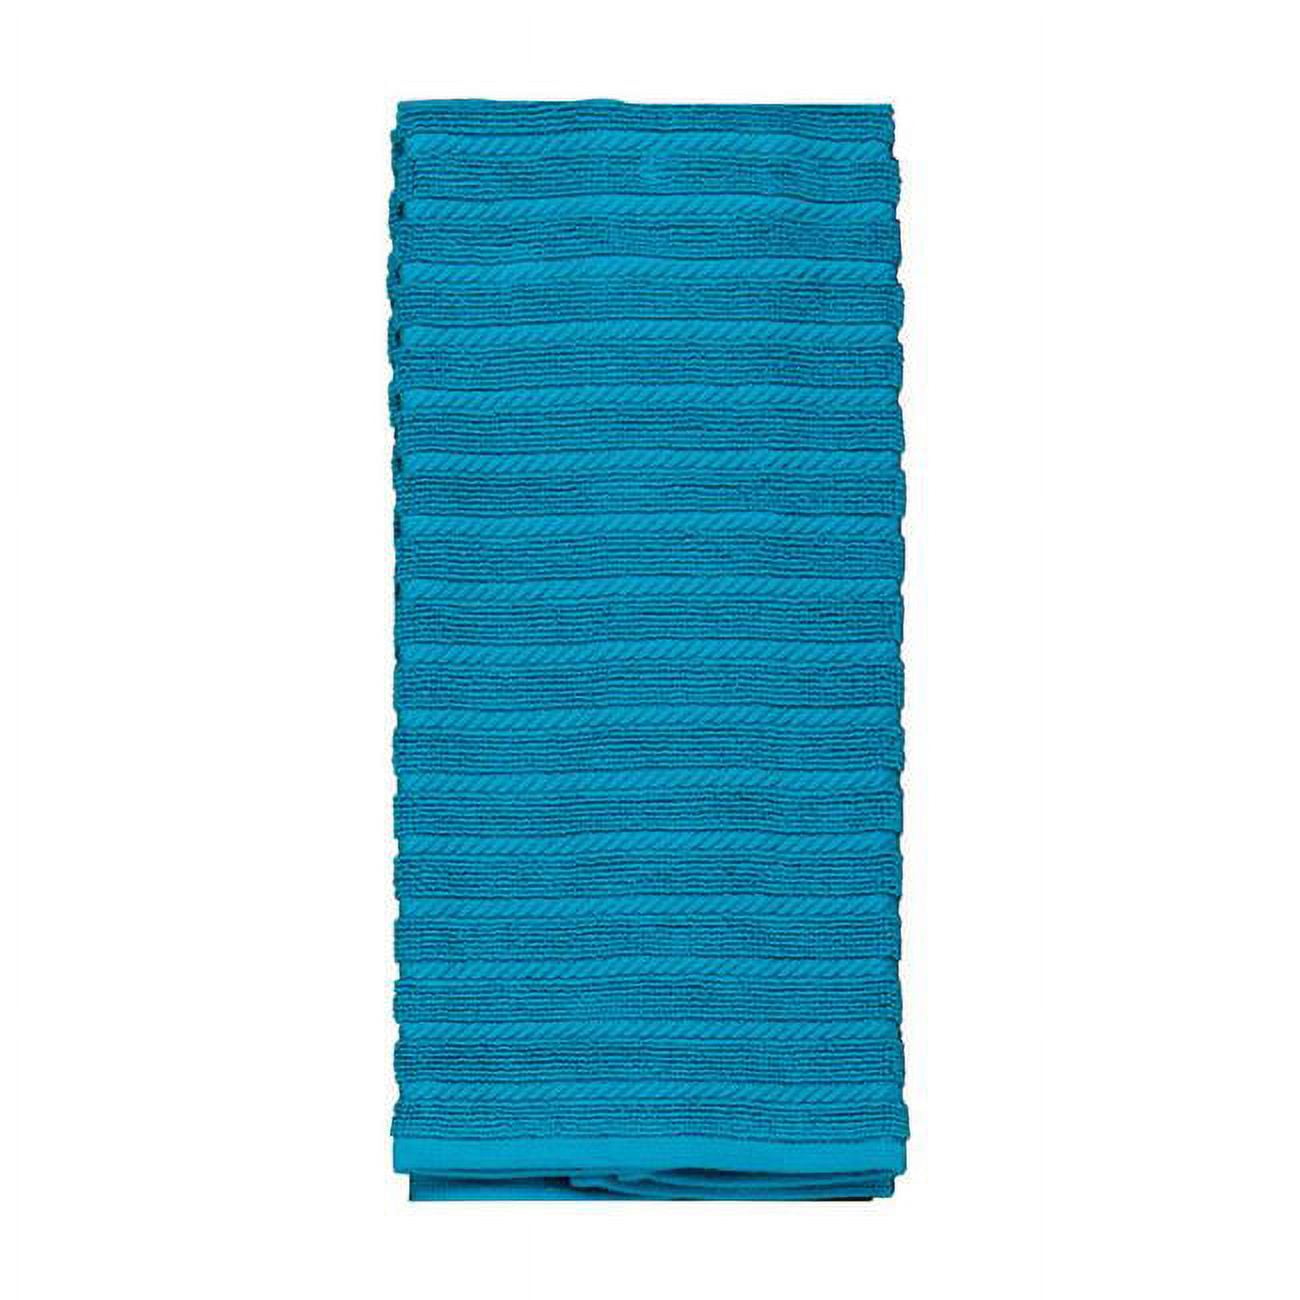 6661755 Teal Cotton Kitchen Towel - Pack Of 6